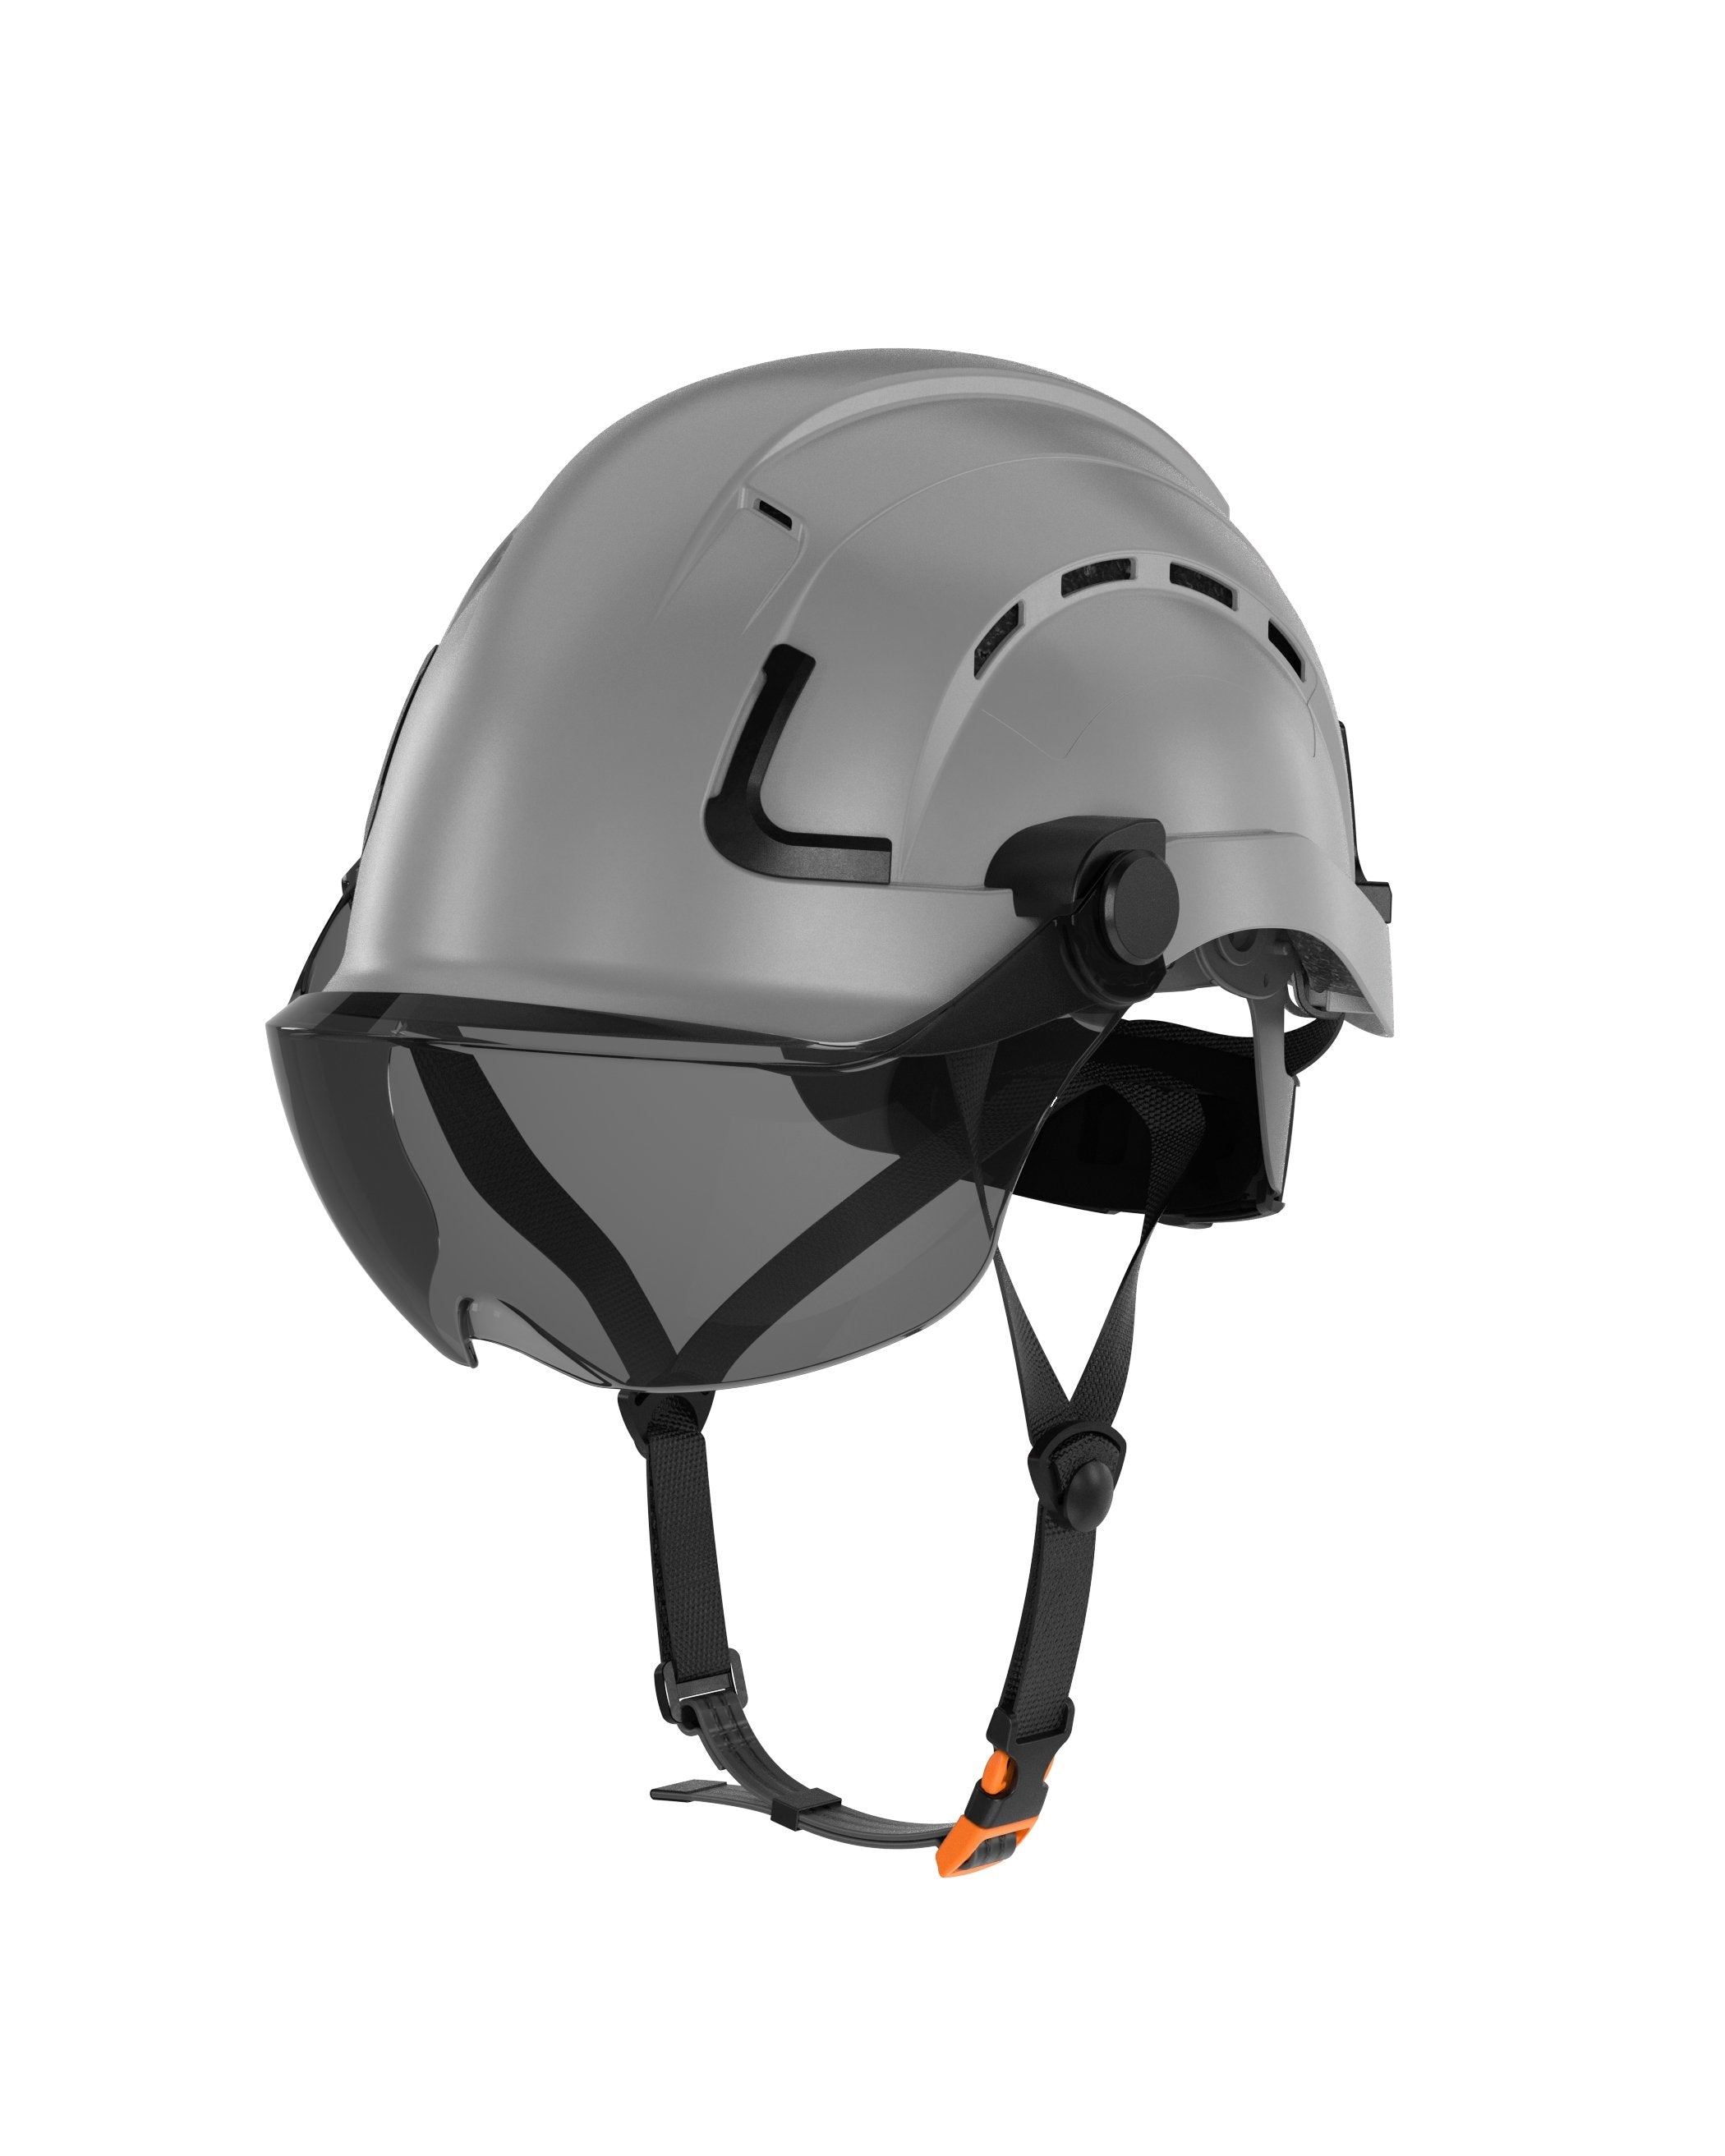 H2-CHV Safety Helmet w/ TINTED Visor Type 2 Class C, ANSI Z89 and EN12492 rated - Defender Safety